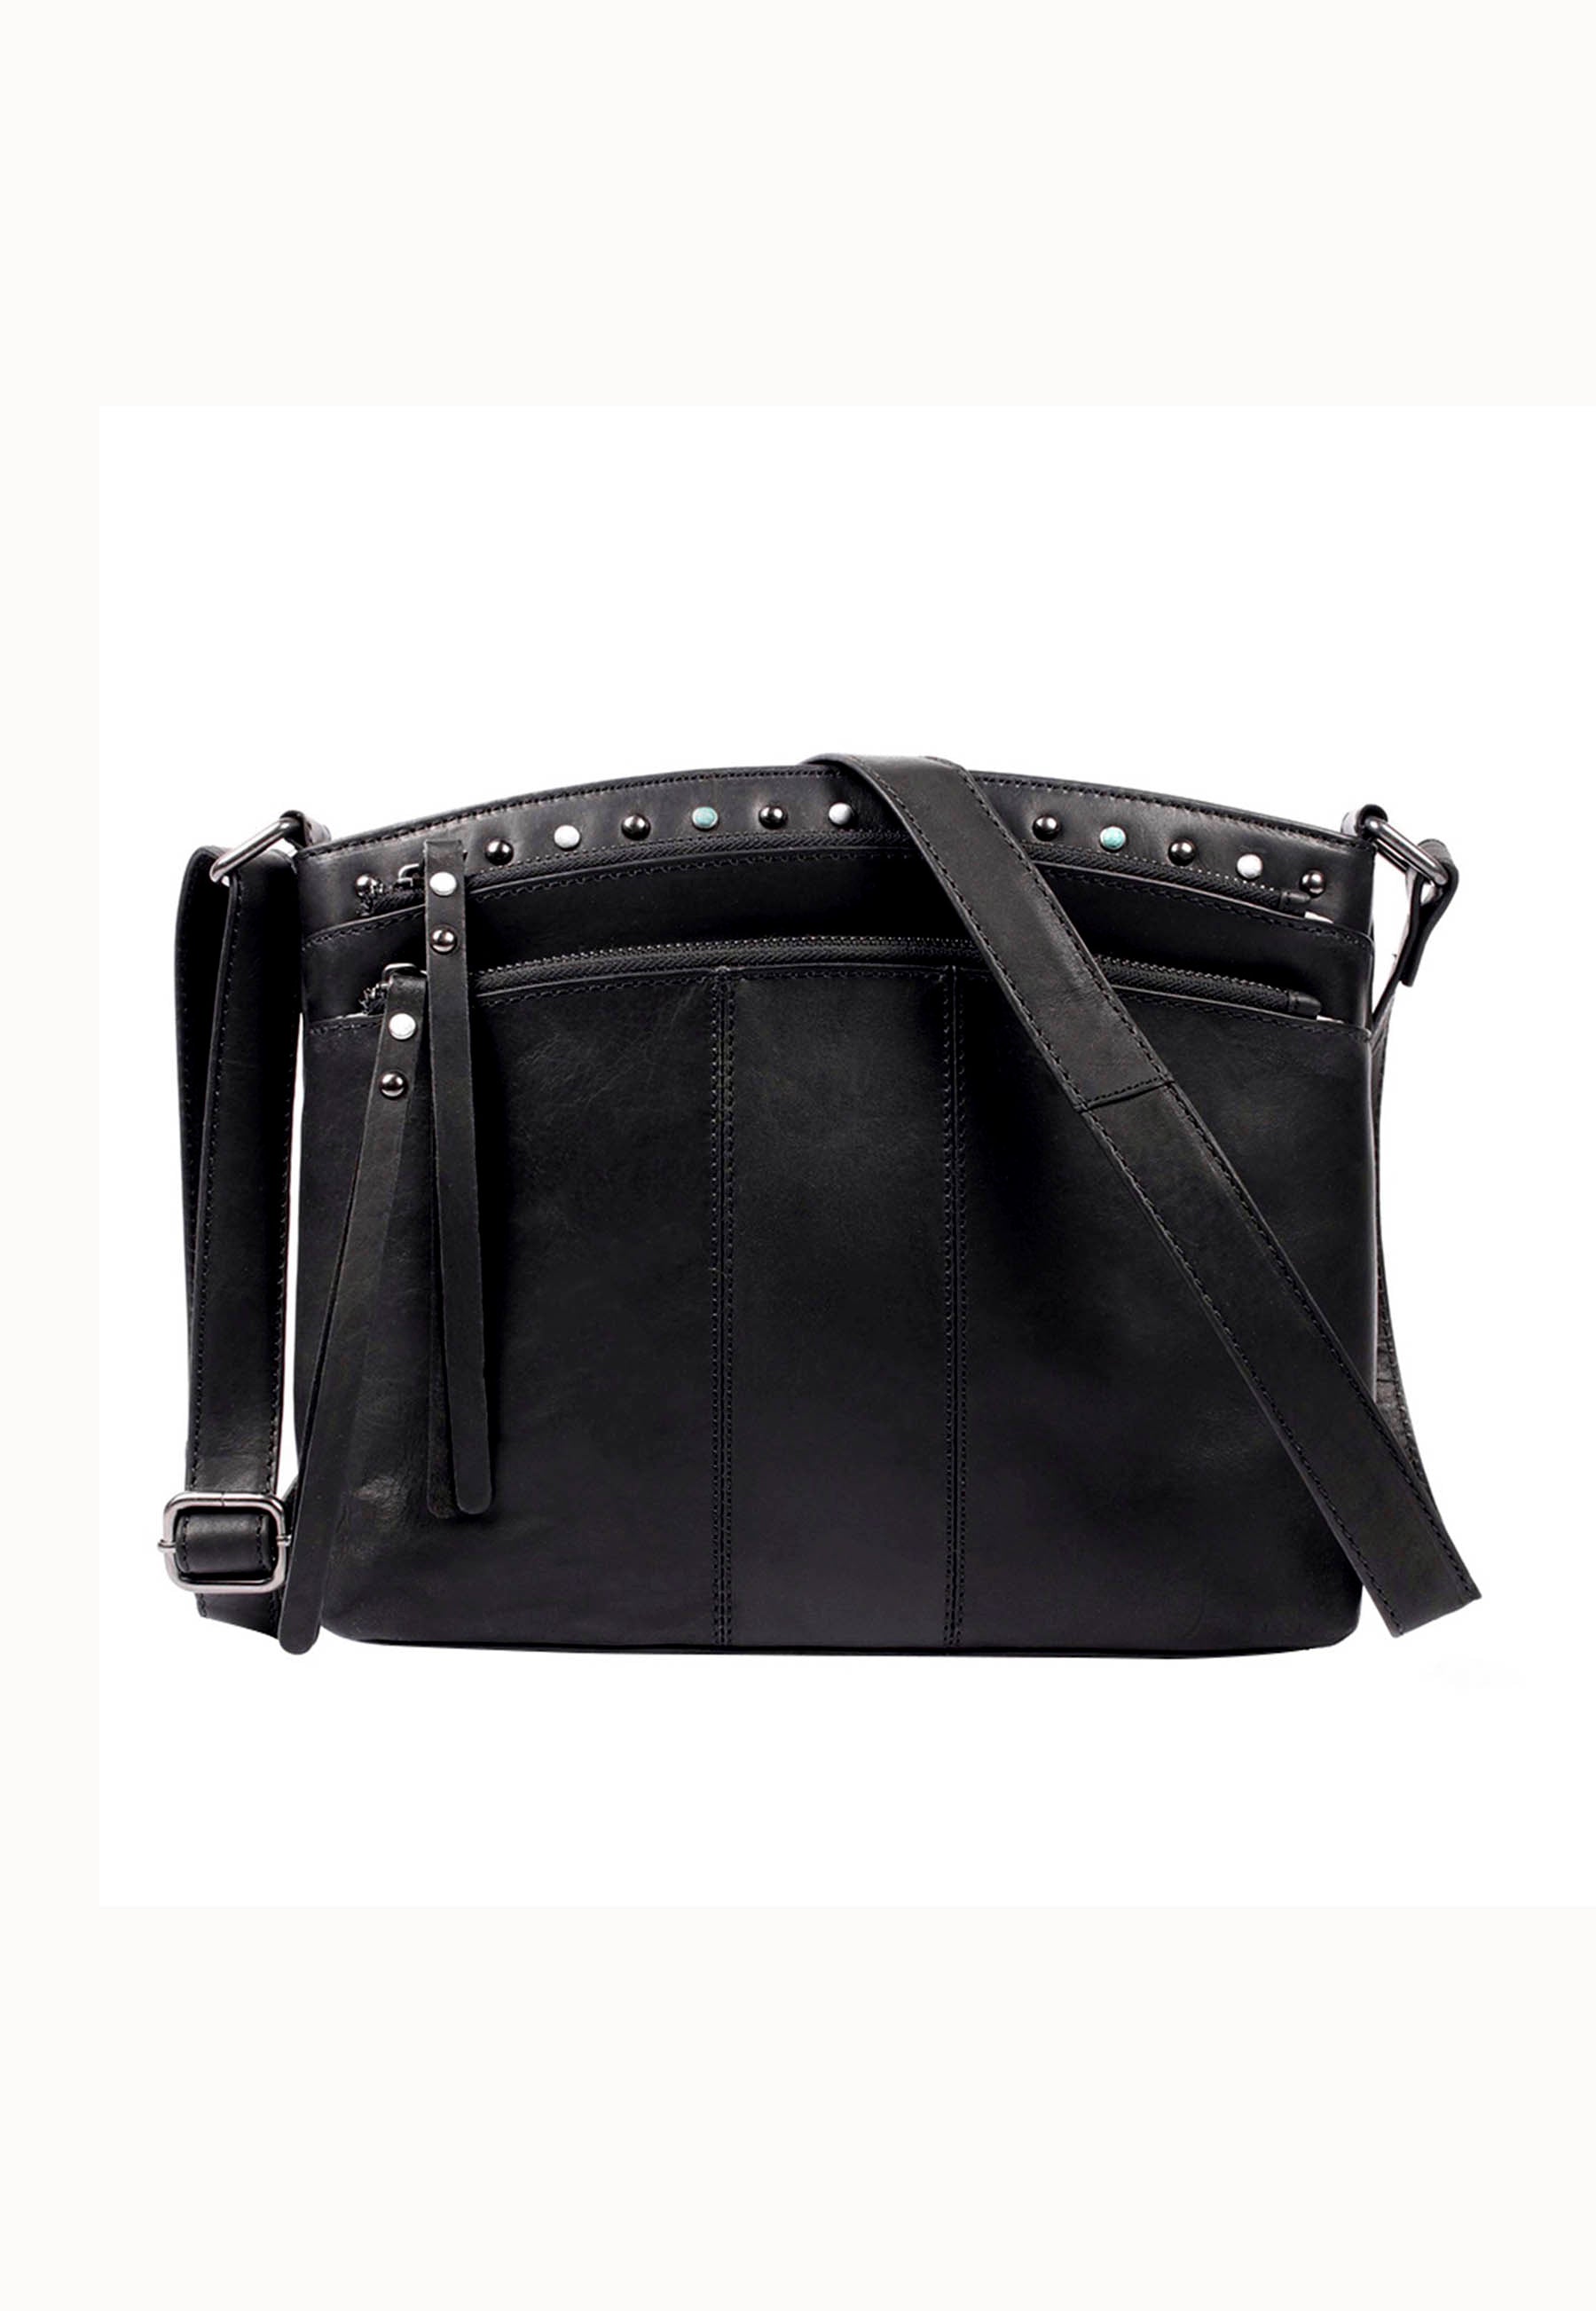 Black leather conceal carry purse